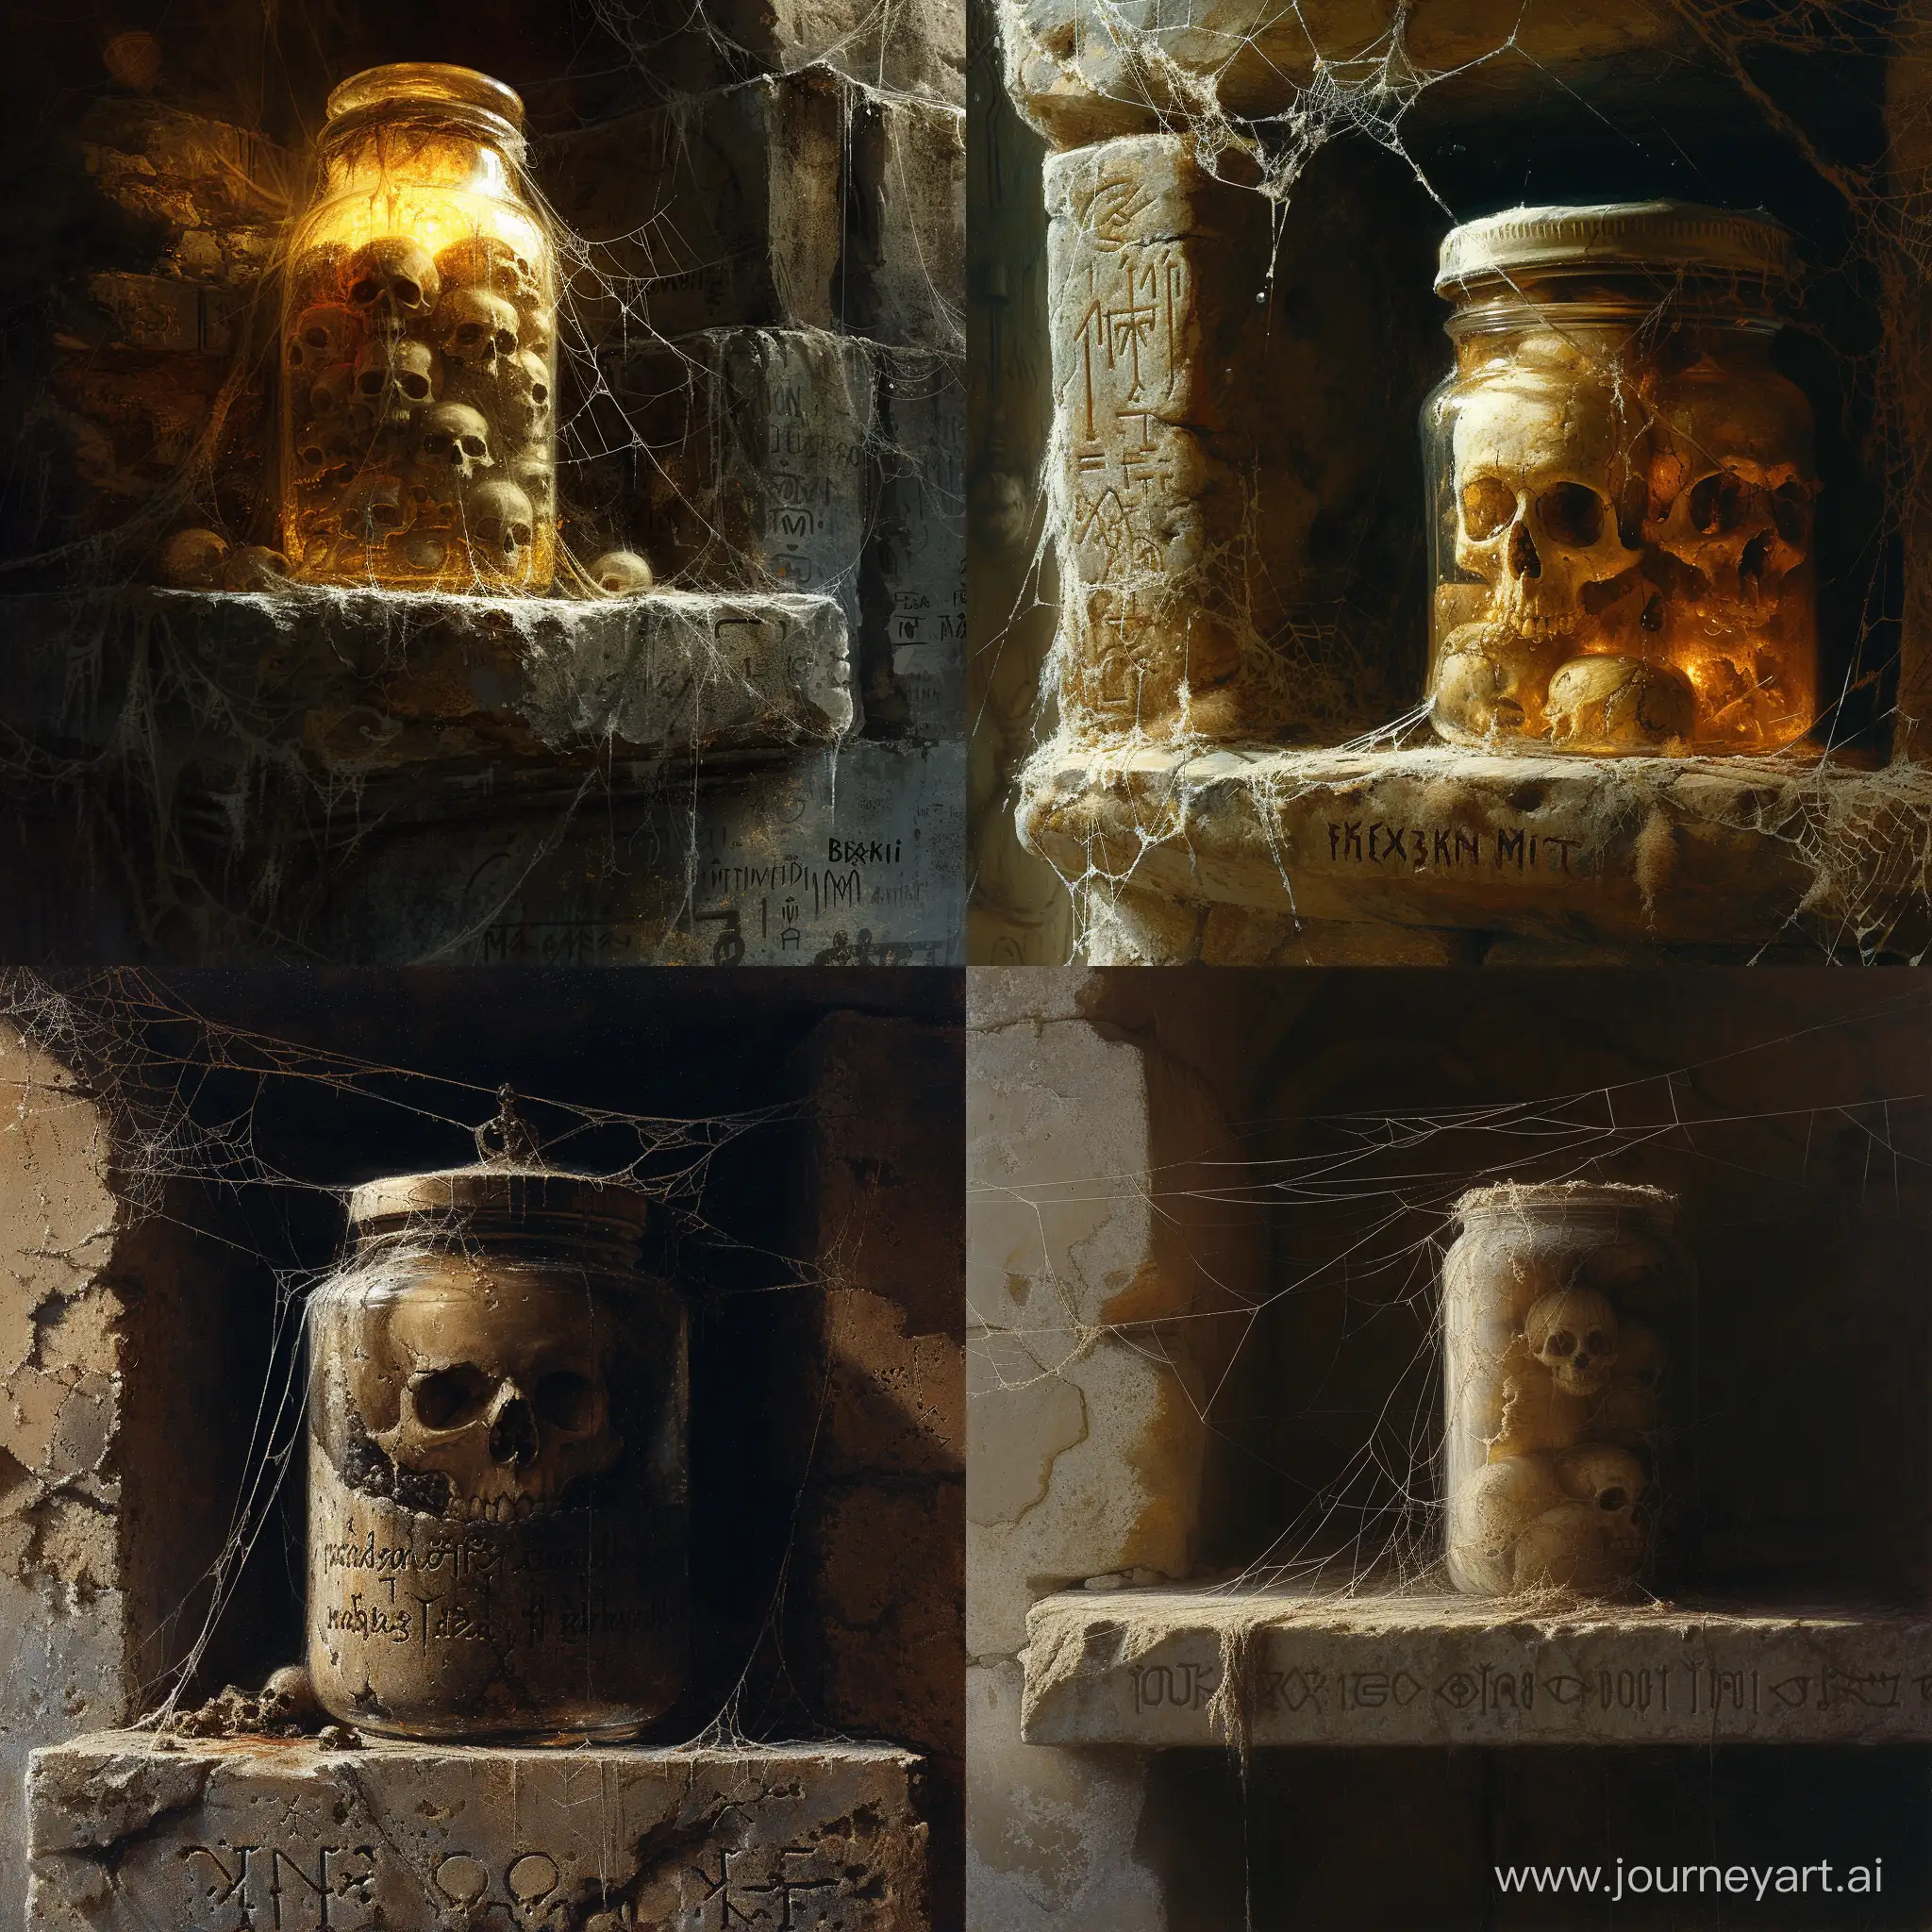 Safeguarding a jar with nothing but 
skull impurities,Beksinski grotesque haunting unsettling dark,on ancient On a stone shelf,cobwebs everywhere,runic script,incredible detail,warm light,terrifying.